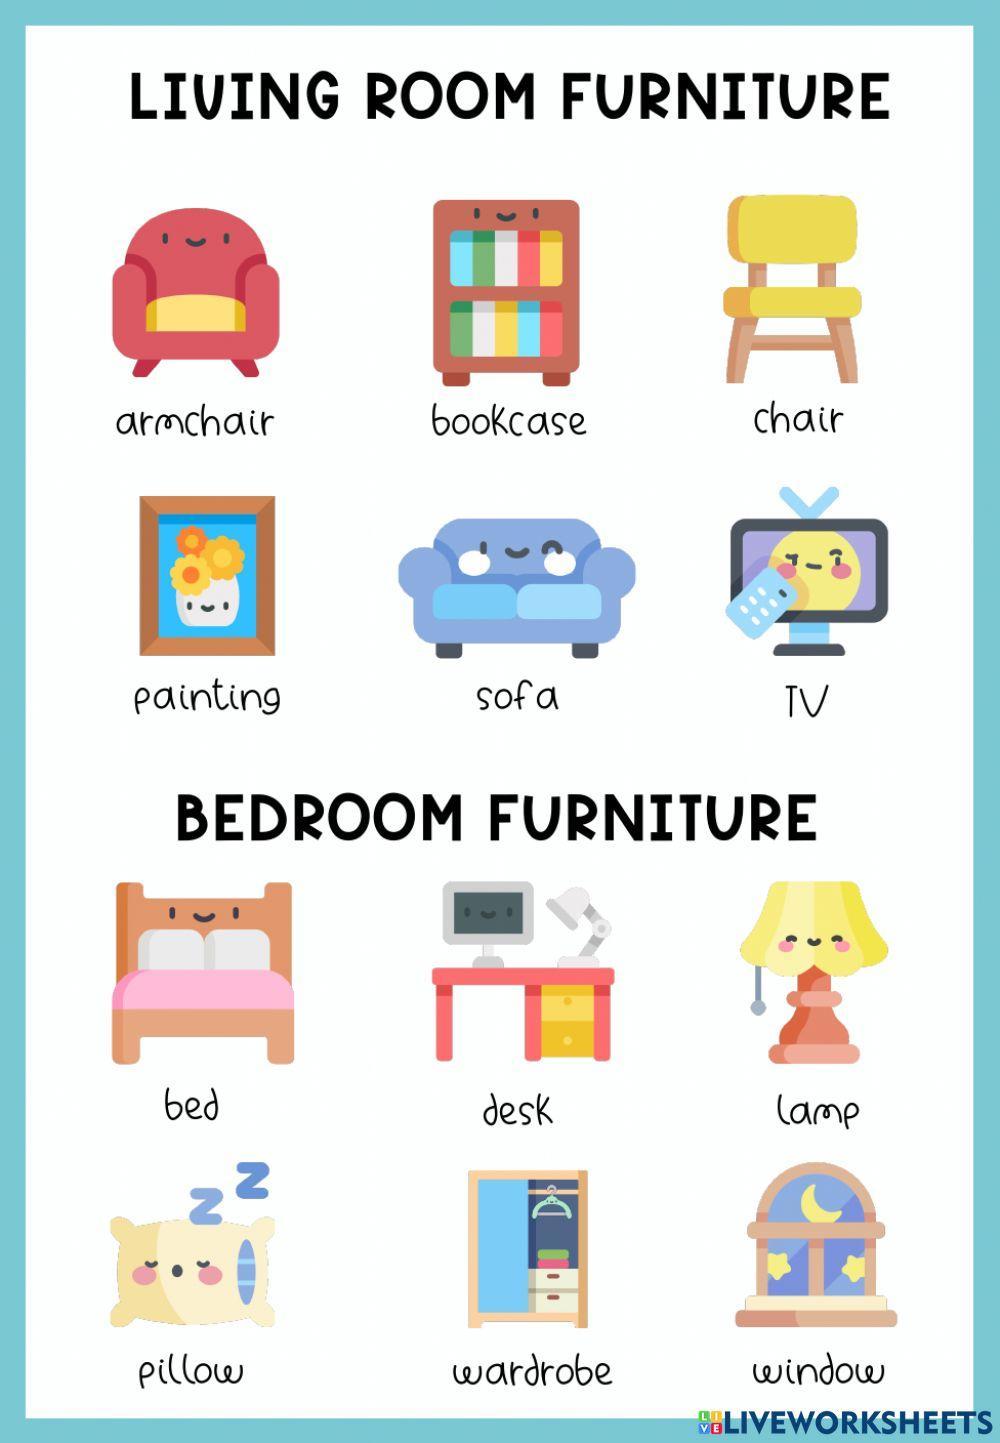 3. Parts of the house and furniture